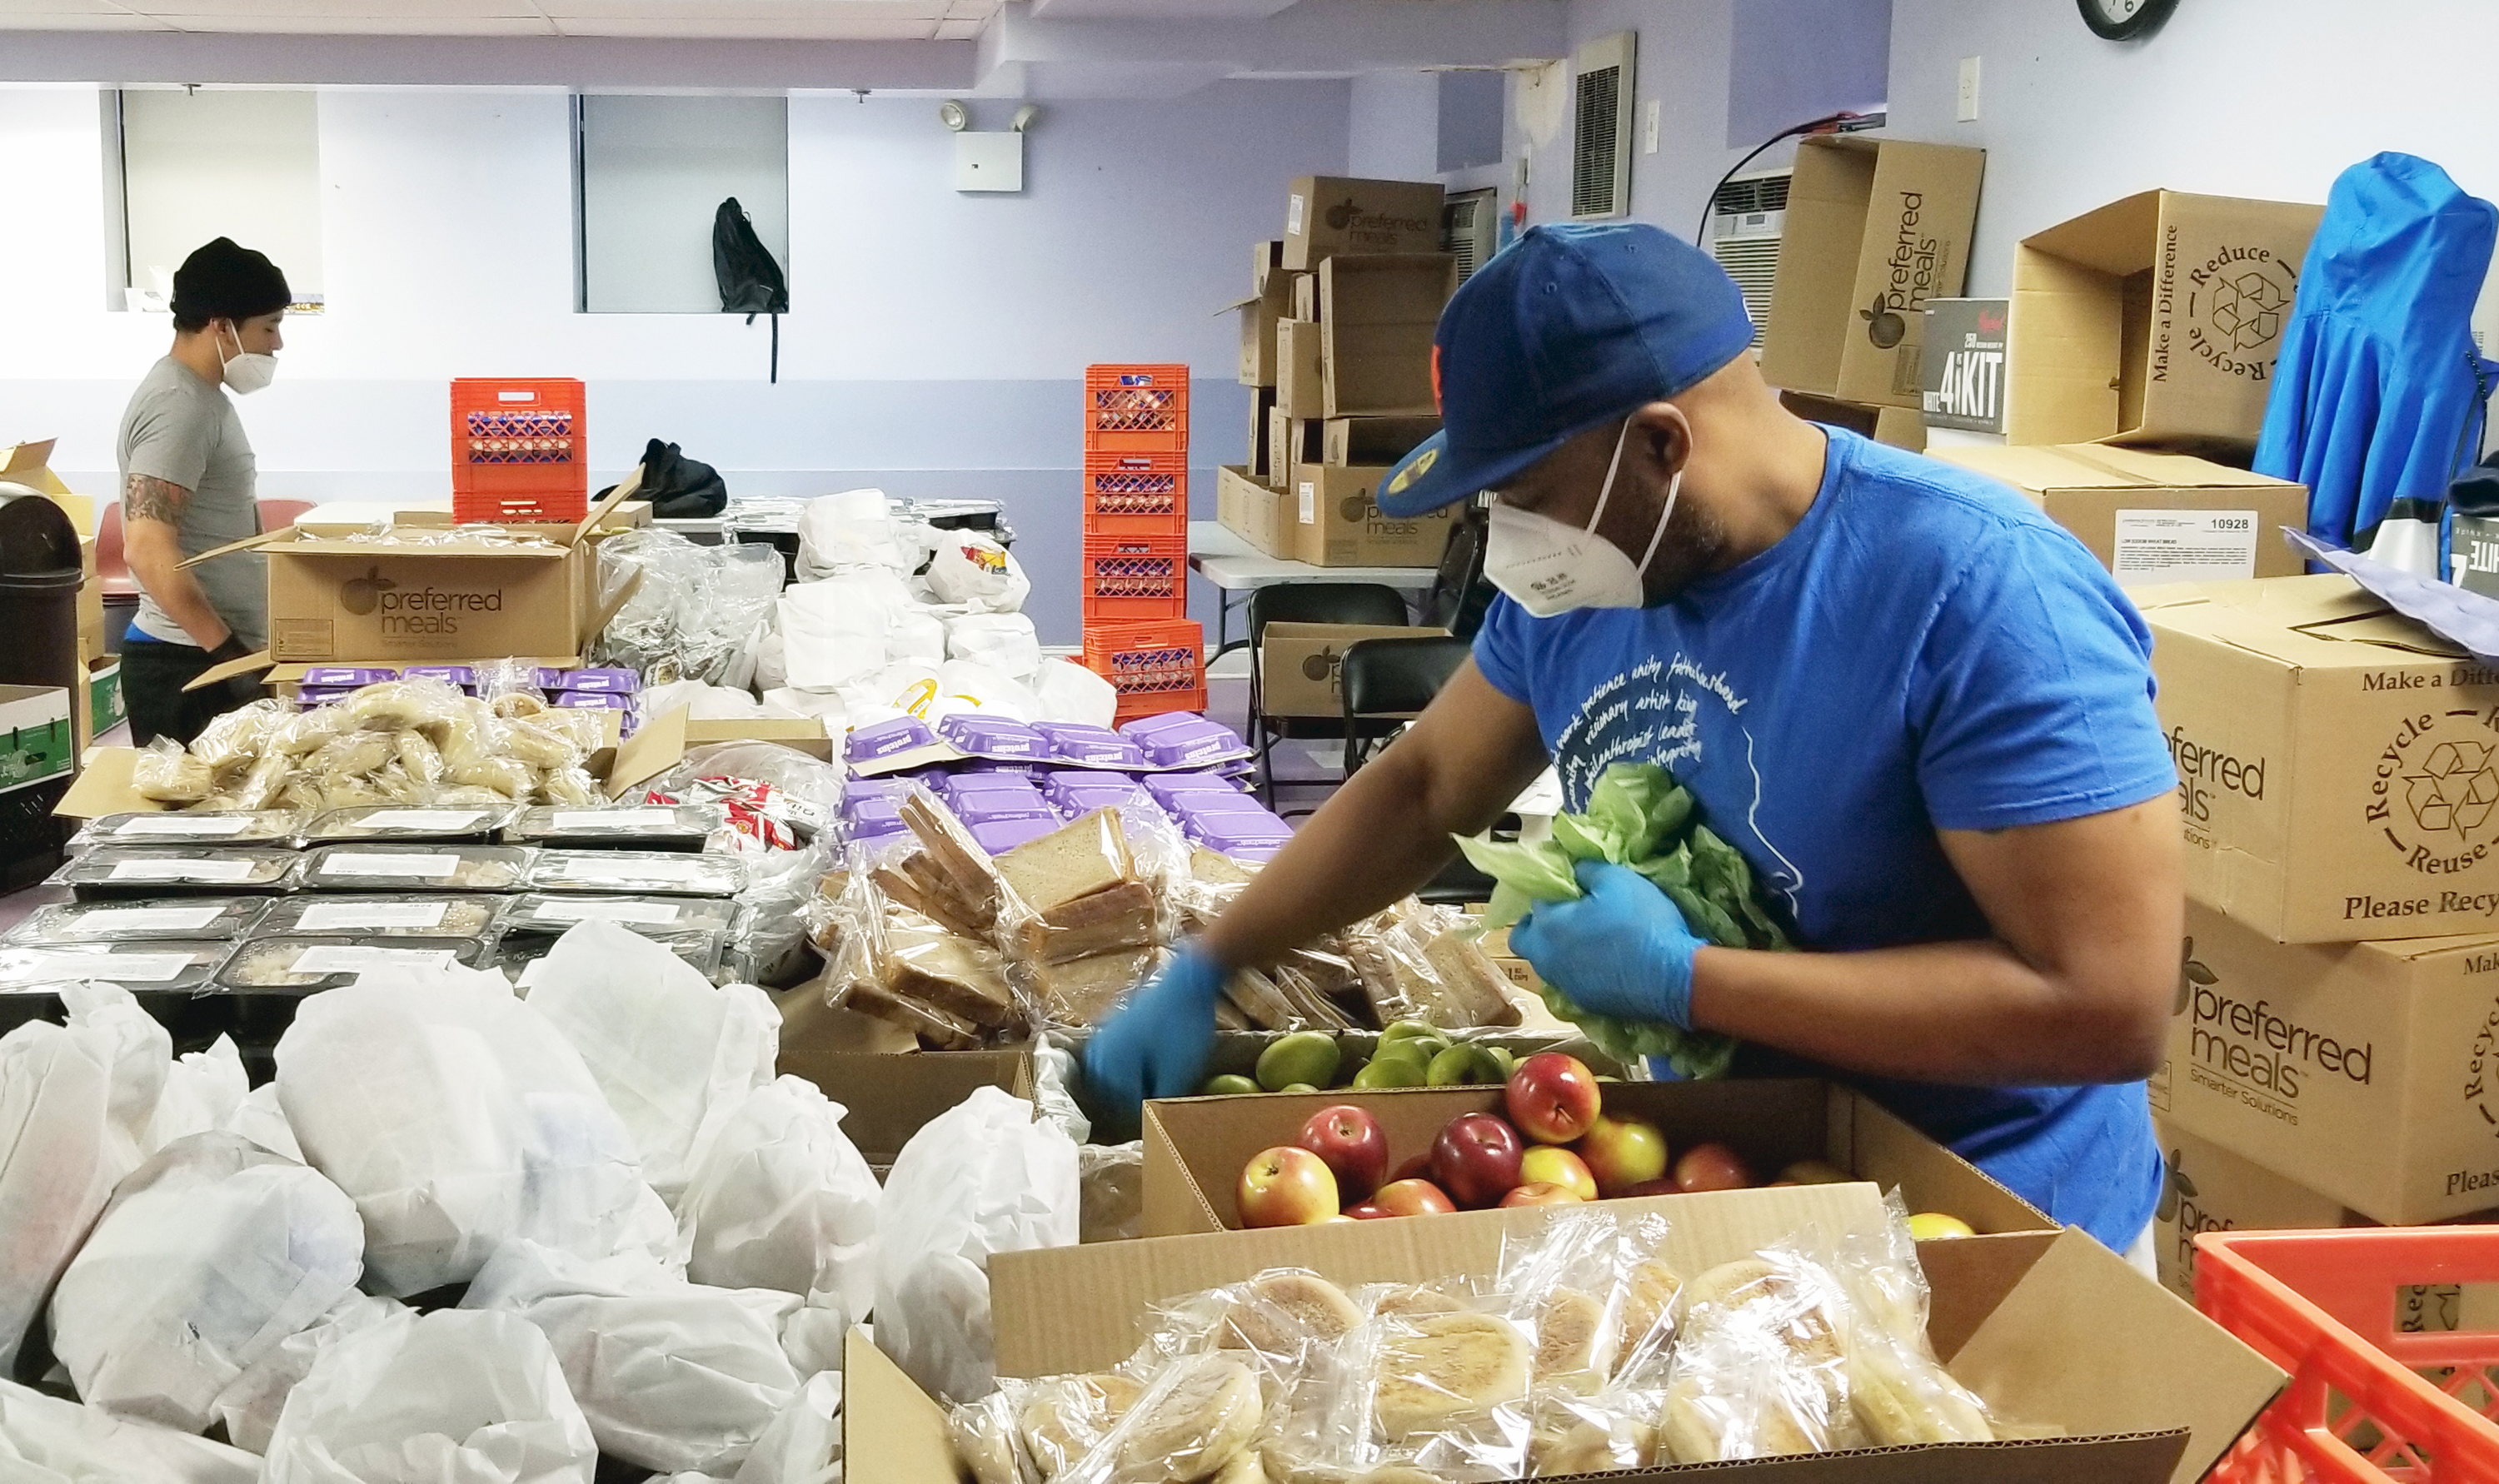 A man wearing a mask working to package emergency food grocery packages in a warehouse setting.